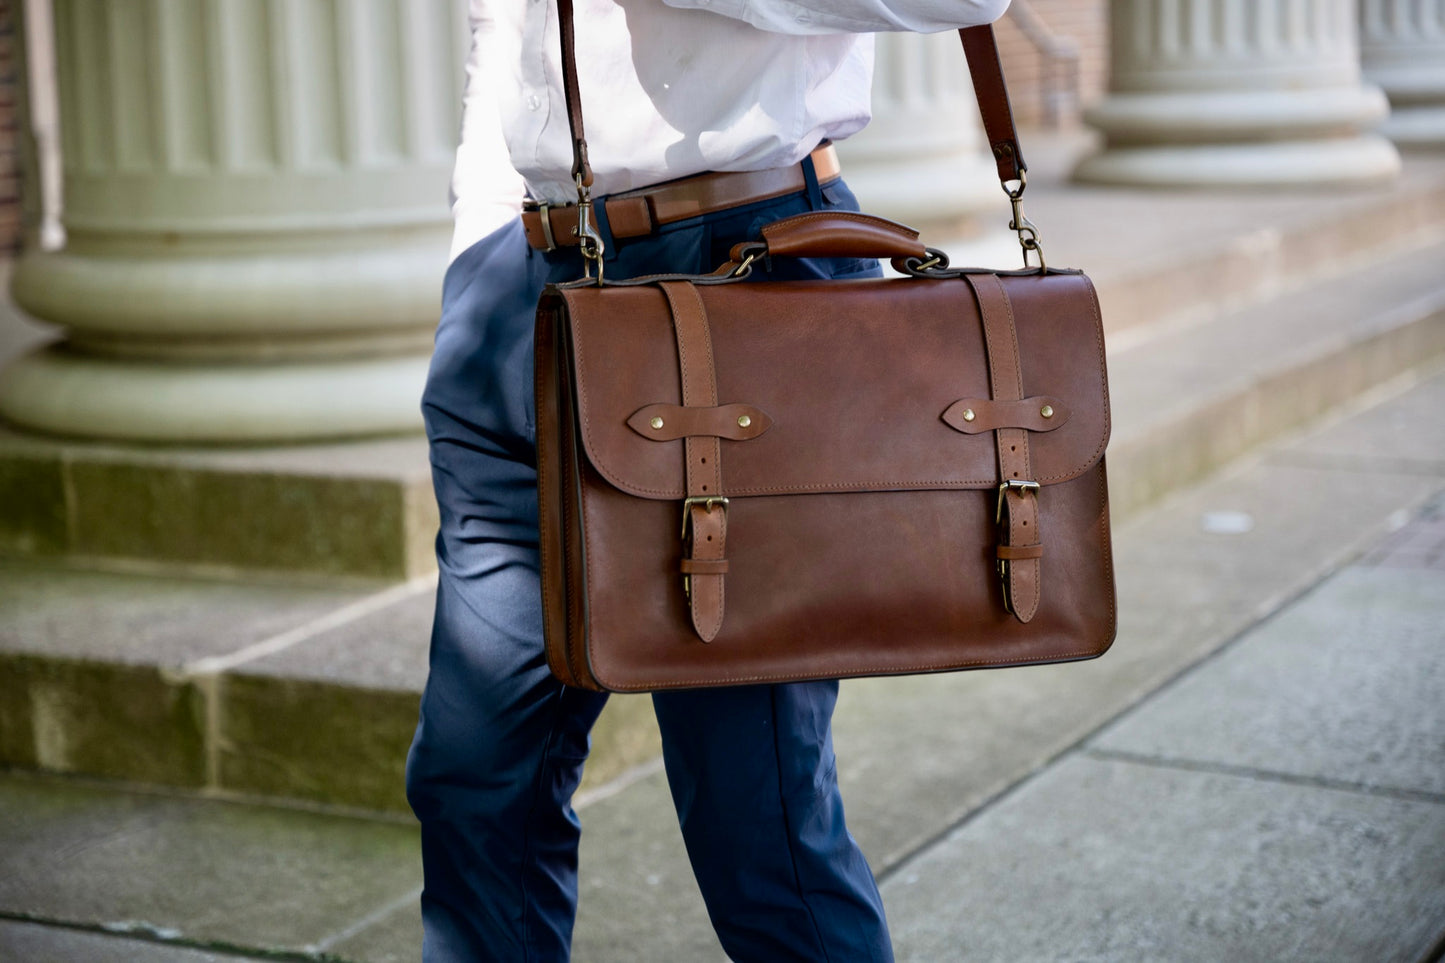 Esq. Briefcase in vintage brown full grain leather with shoulder strap for carrying - courthouse steps